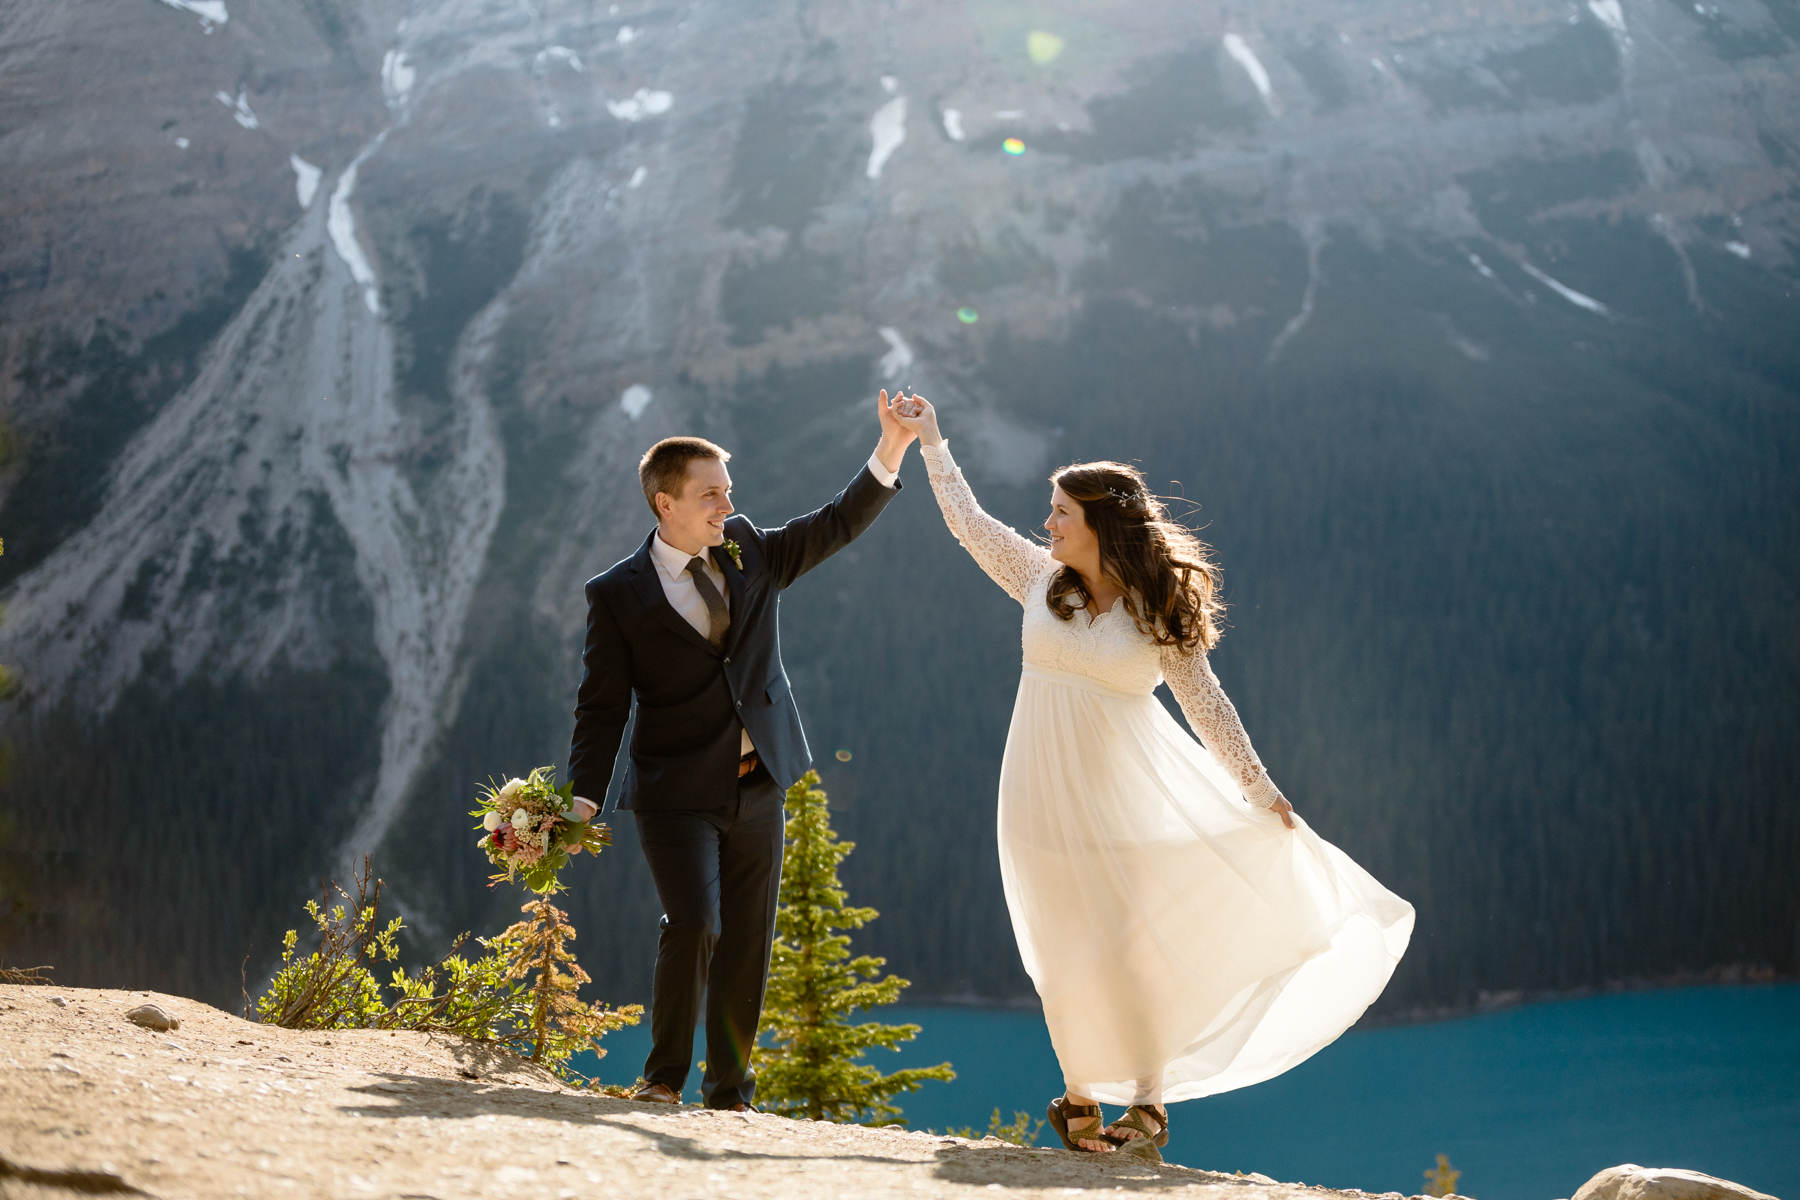 Vow Renewal Photography in Banff - Image 19